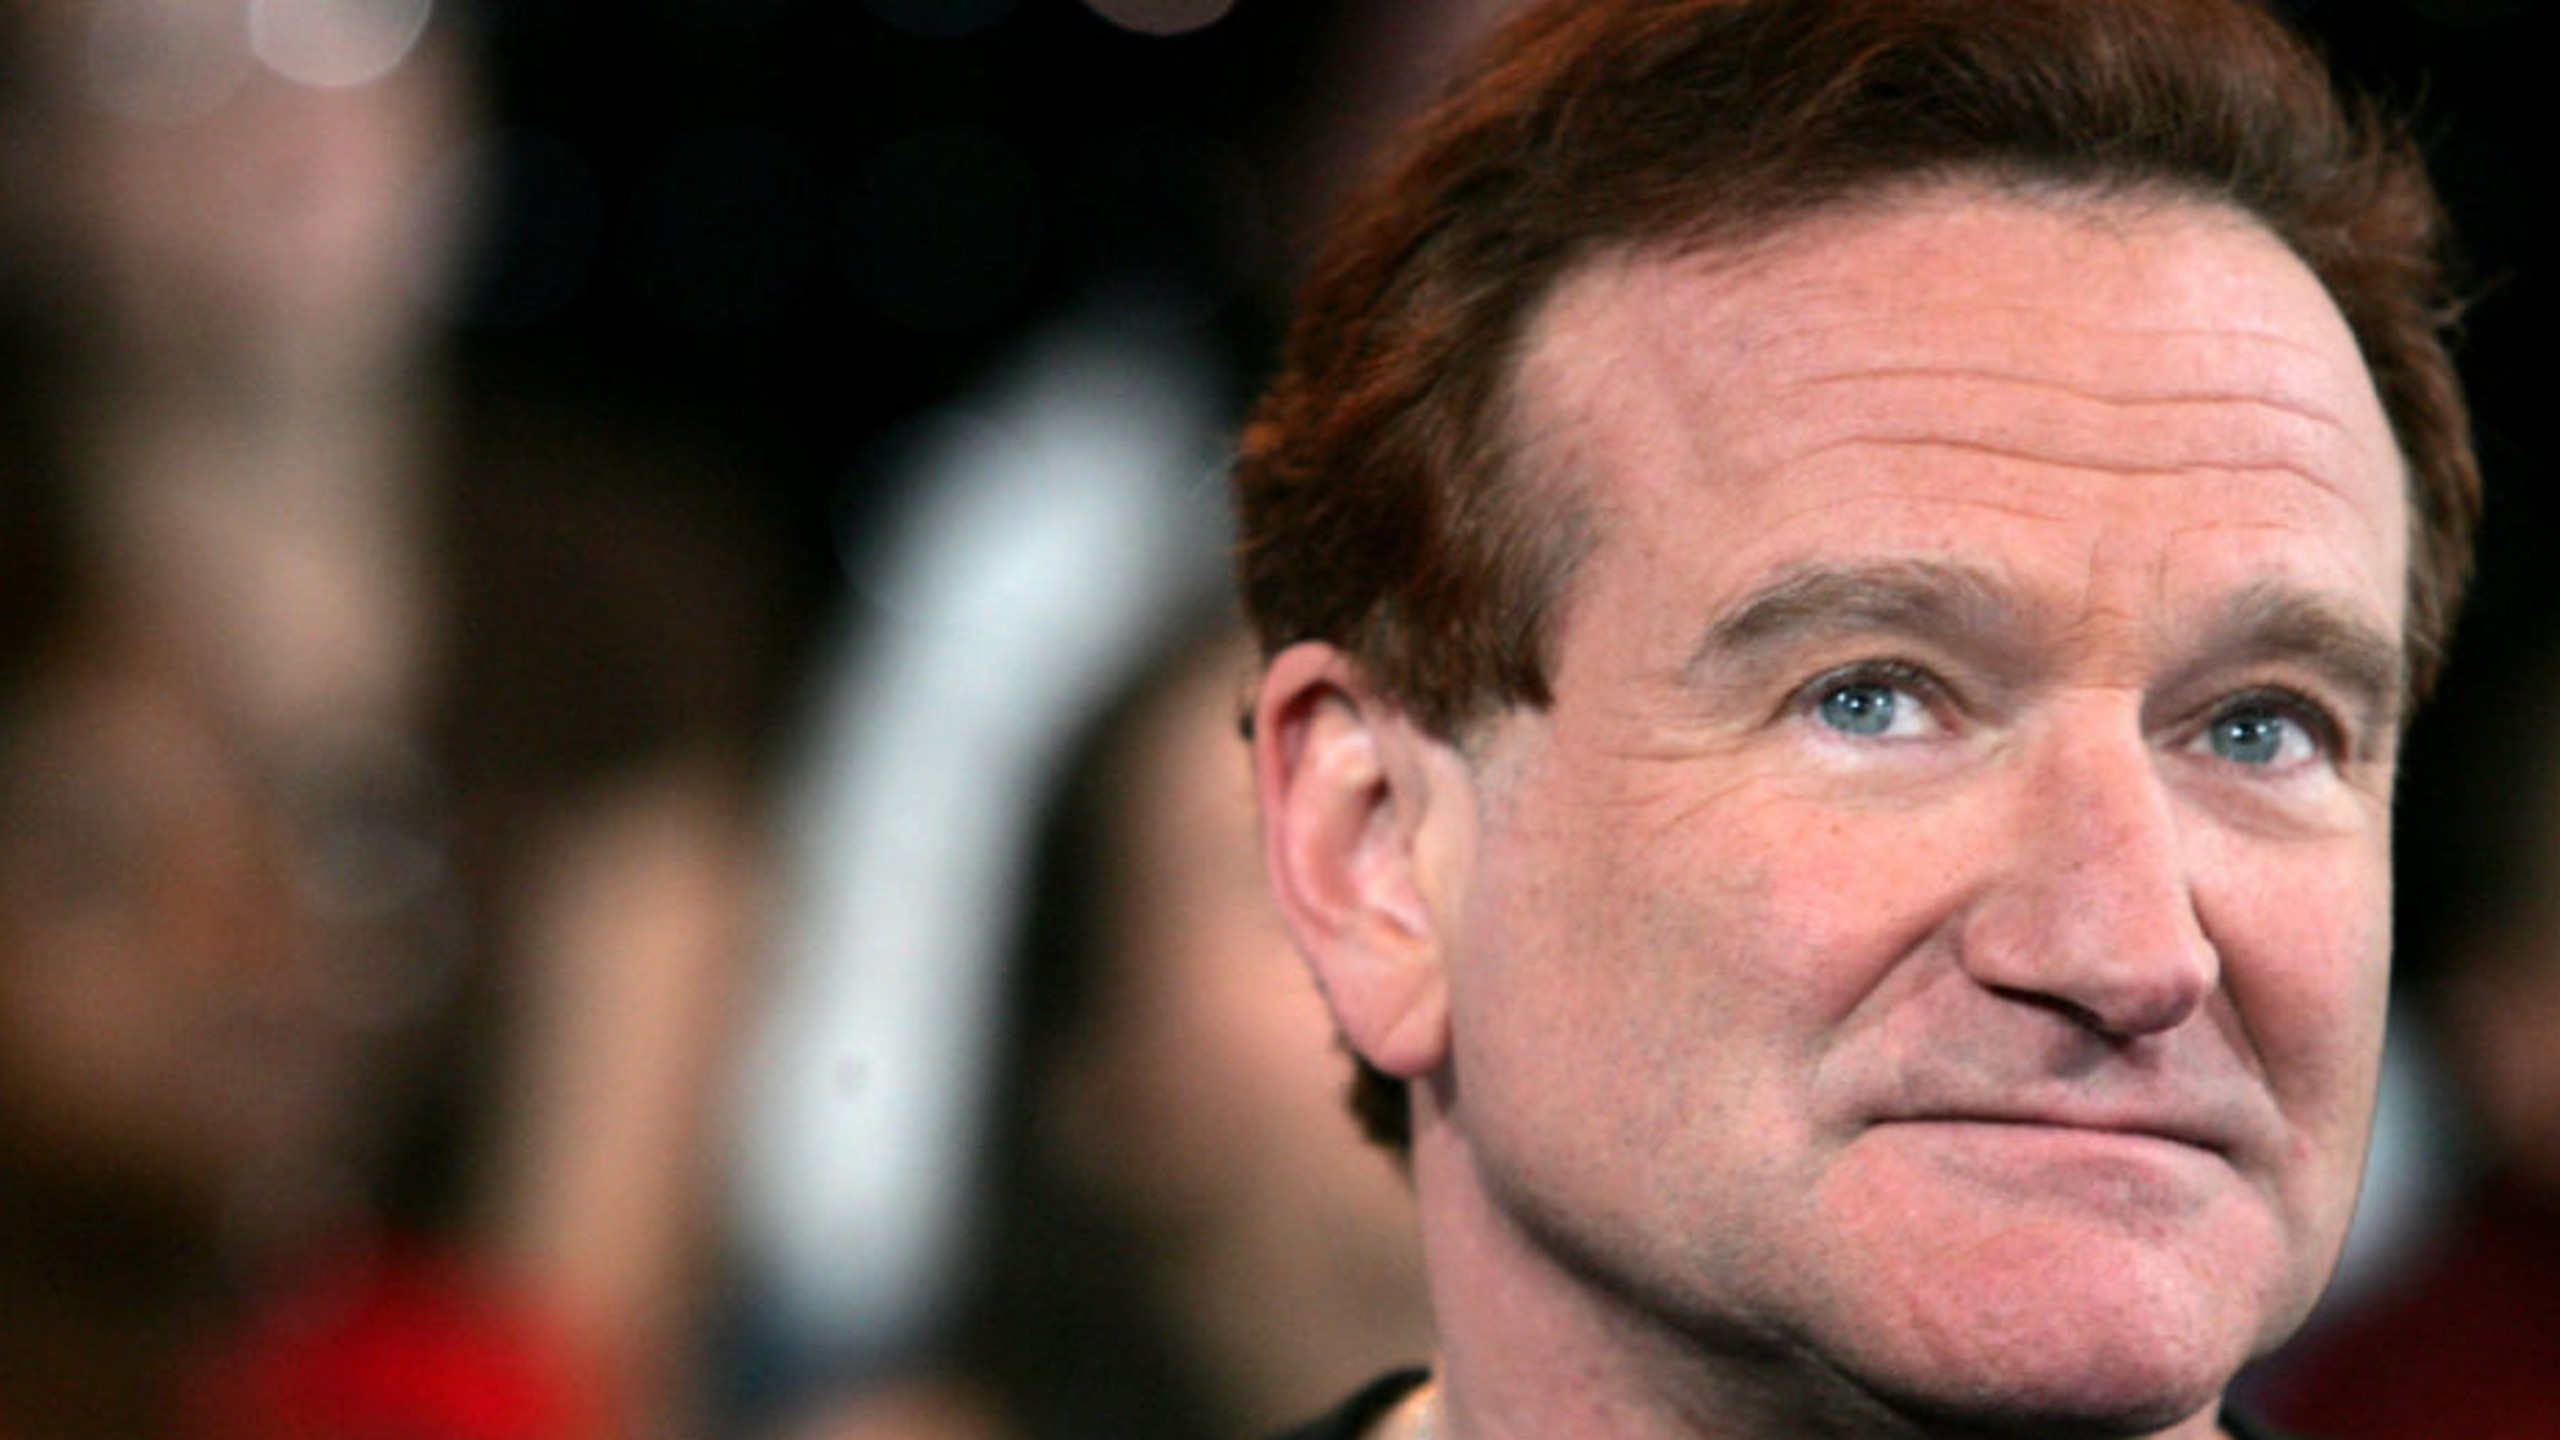 Robin Williams comforts woman after husband's suicide